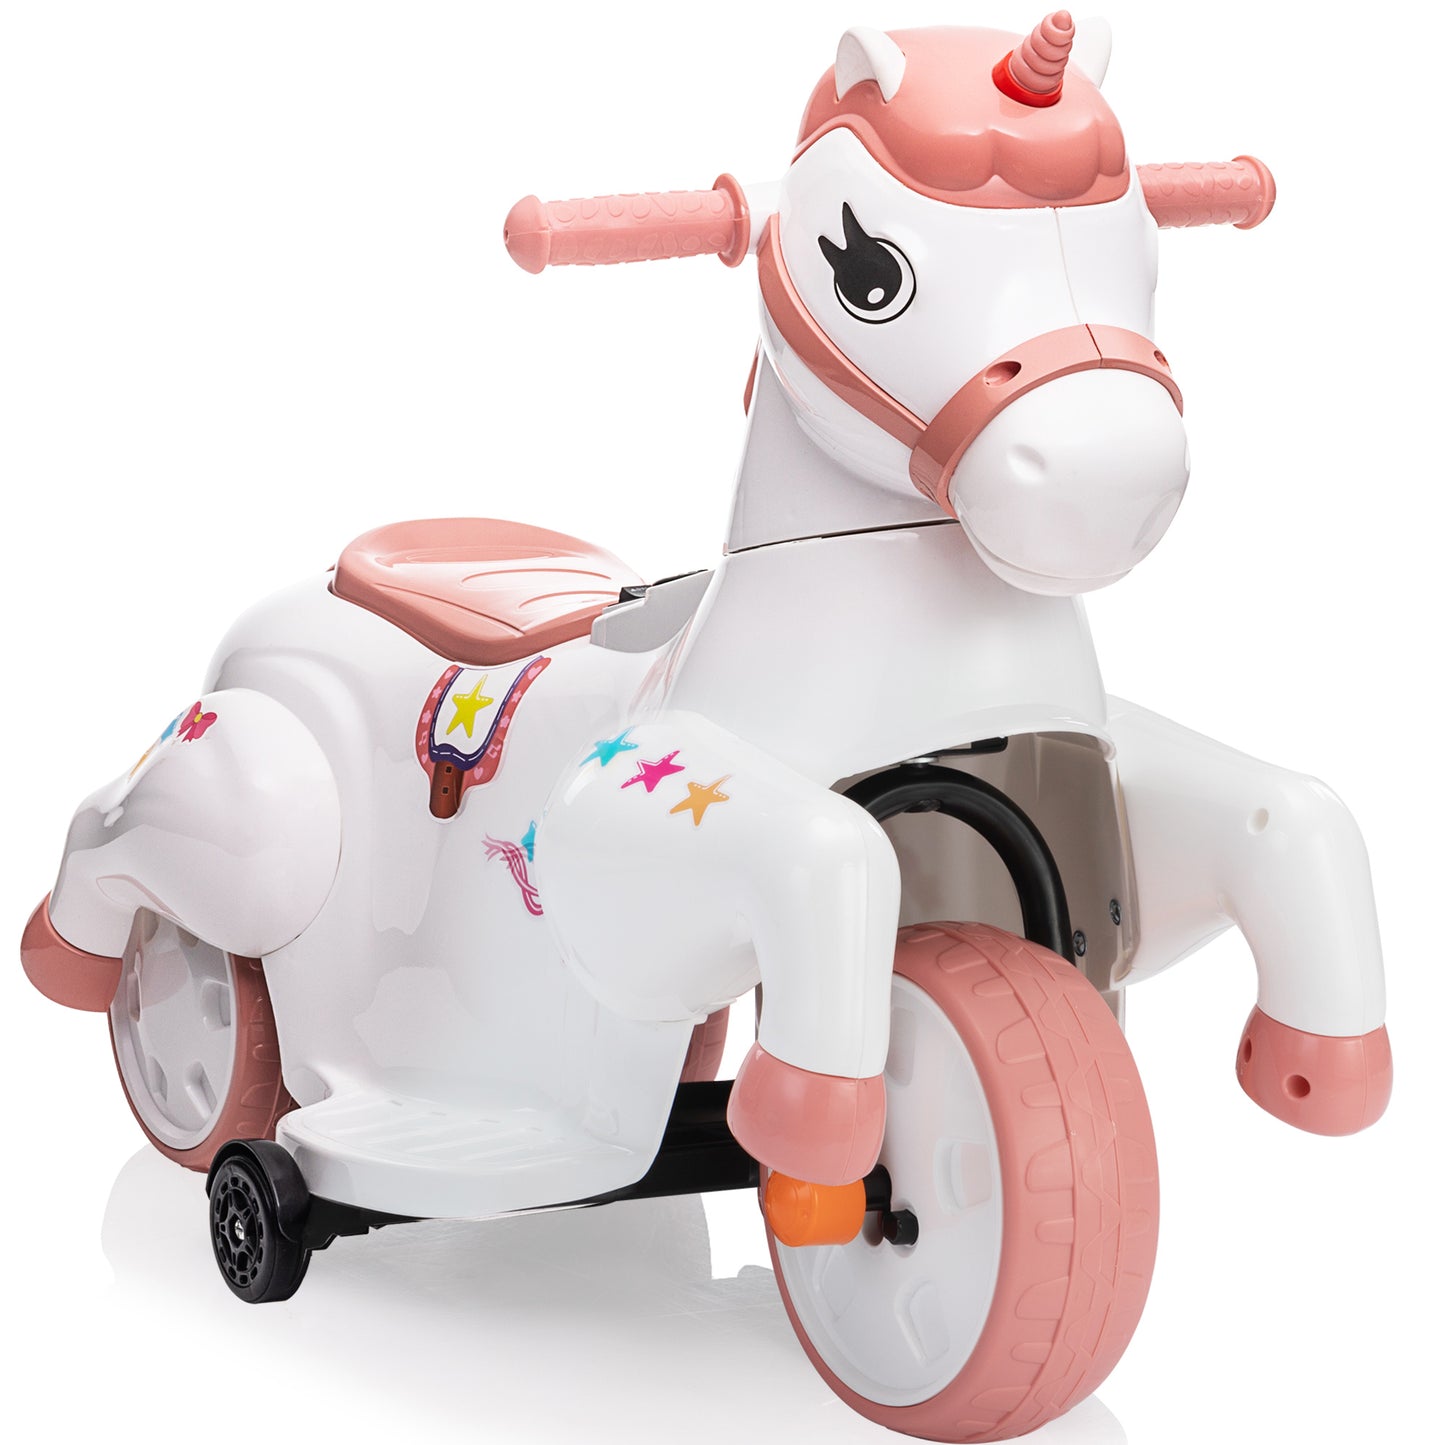 Unicorn stroller,Electric Toy Bike with Training Wheels for Kids 3-6,Pink